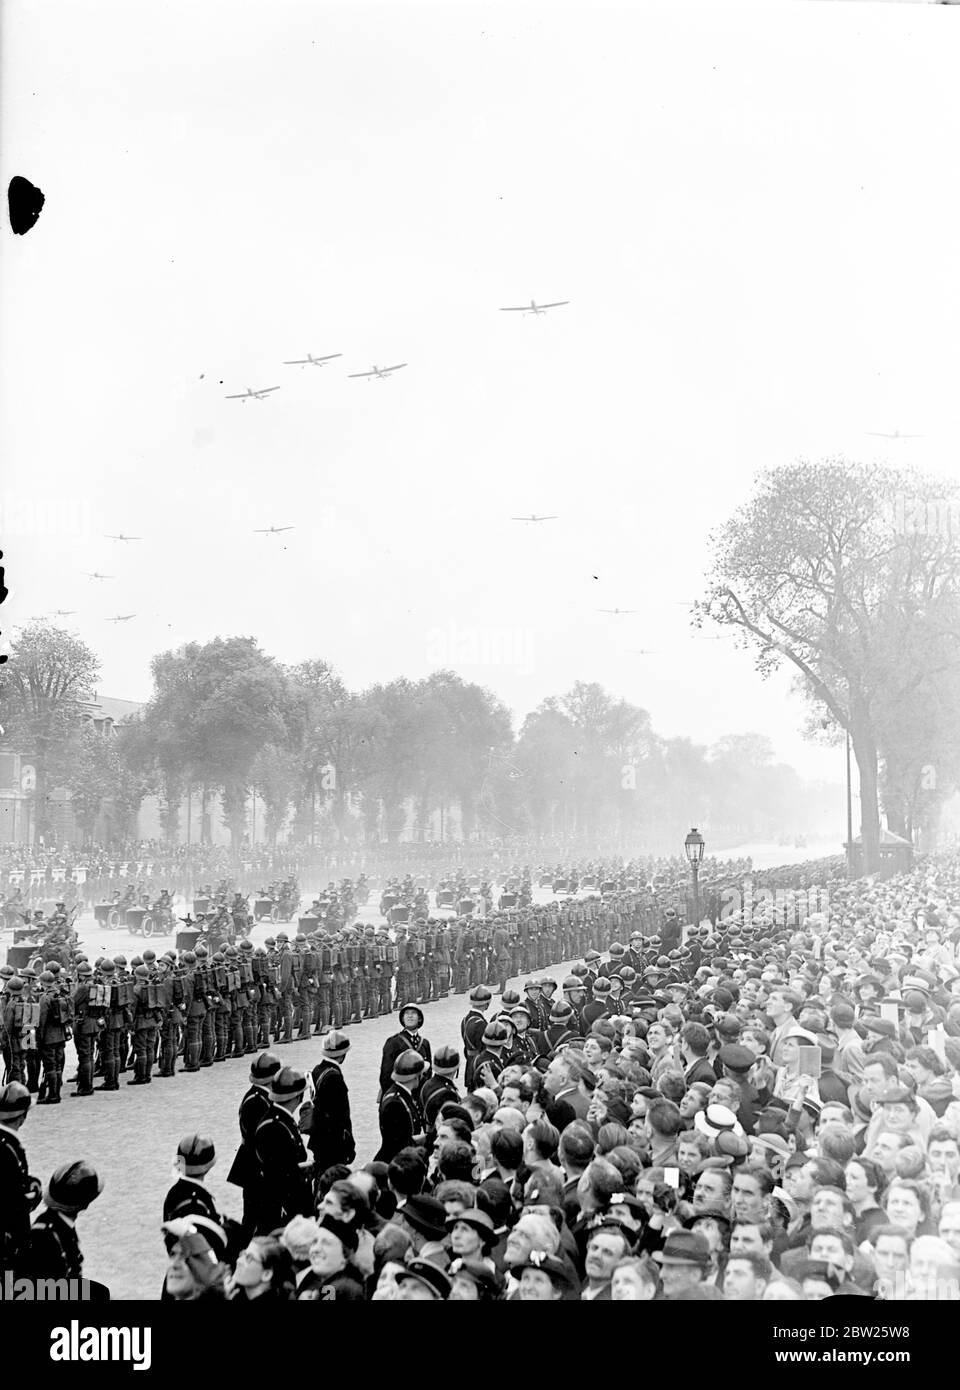 King sees might of French Army on parade at Versailles. The King, accompanied by President Lebrun, reviewed over 40,000 men of the French Army, including cavalry, mechanised and colonial divisions, at a parade in his honour at Versailles, Paris. During a review 600 planes flew overhead. Photo shows, a general view of the parade with aerolanes flying overhead. 21 July 1938 Stock Photo